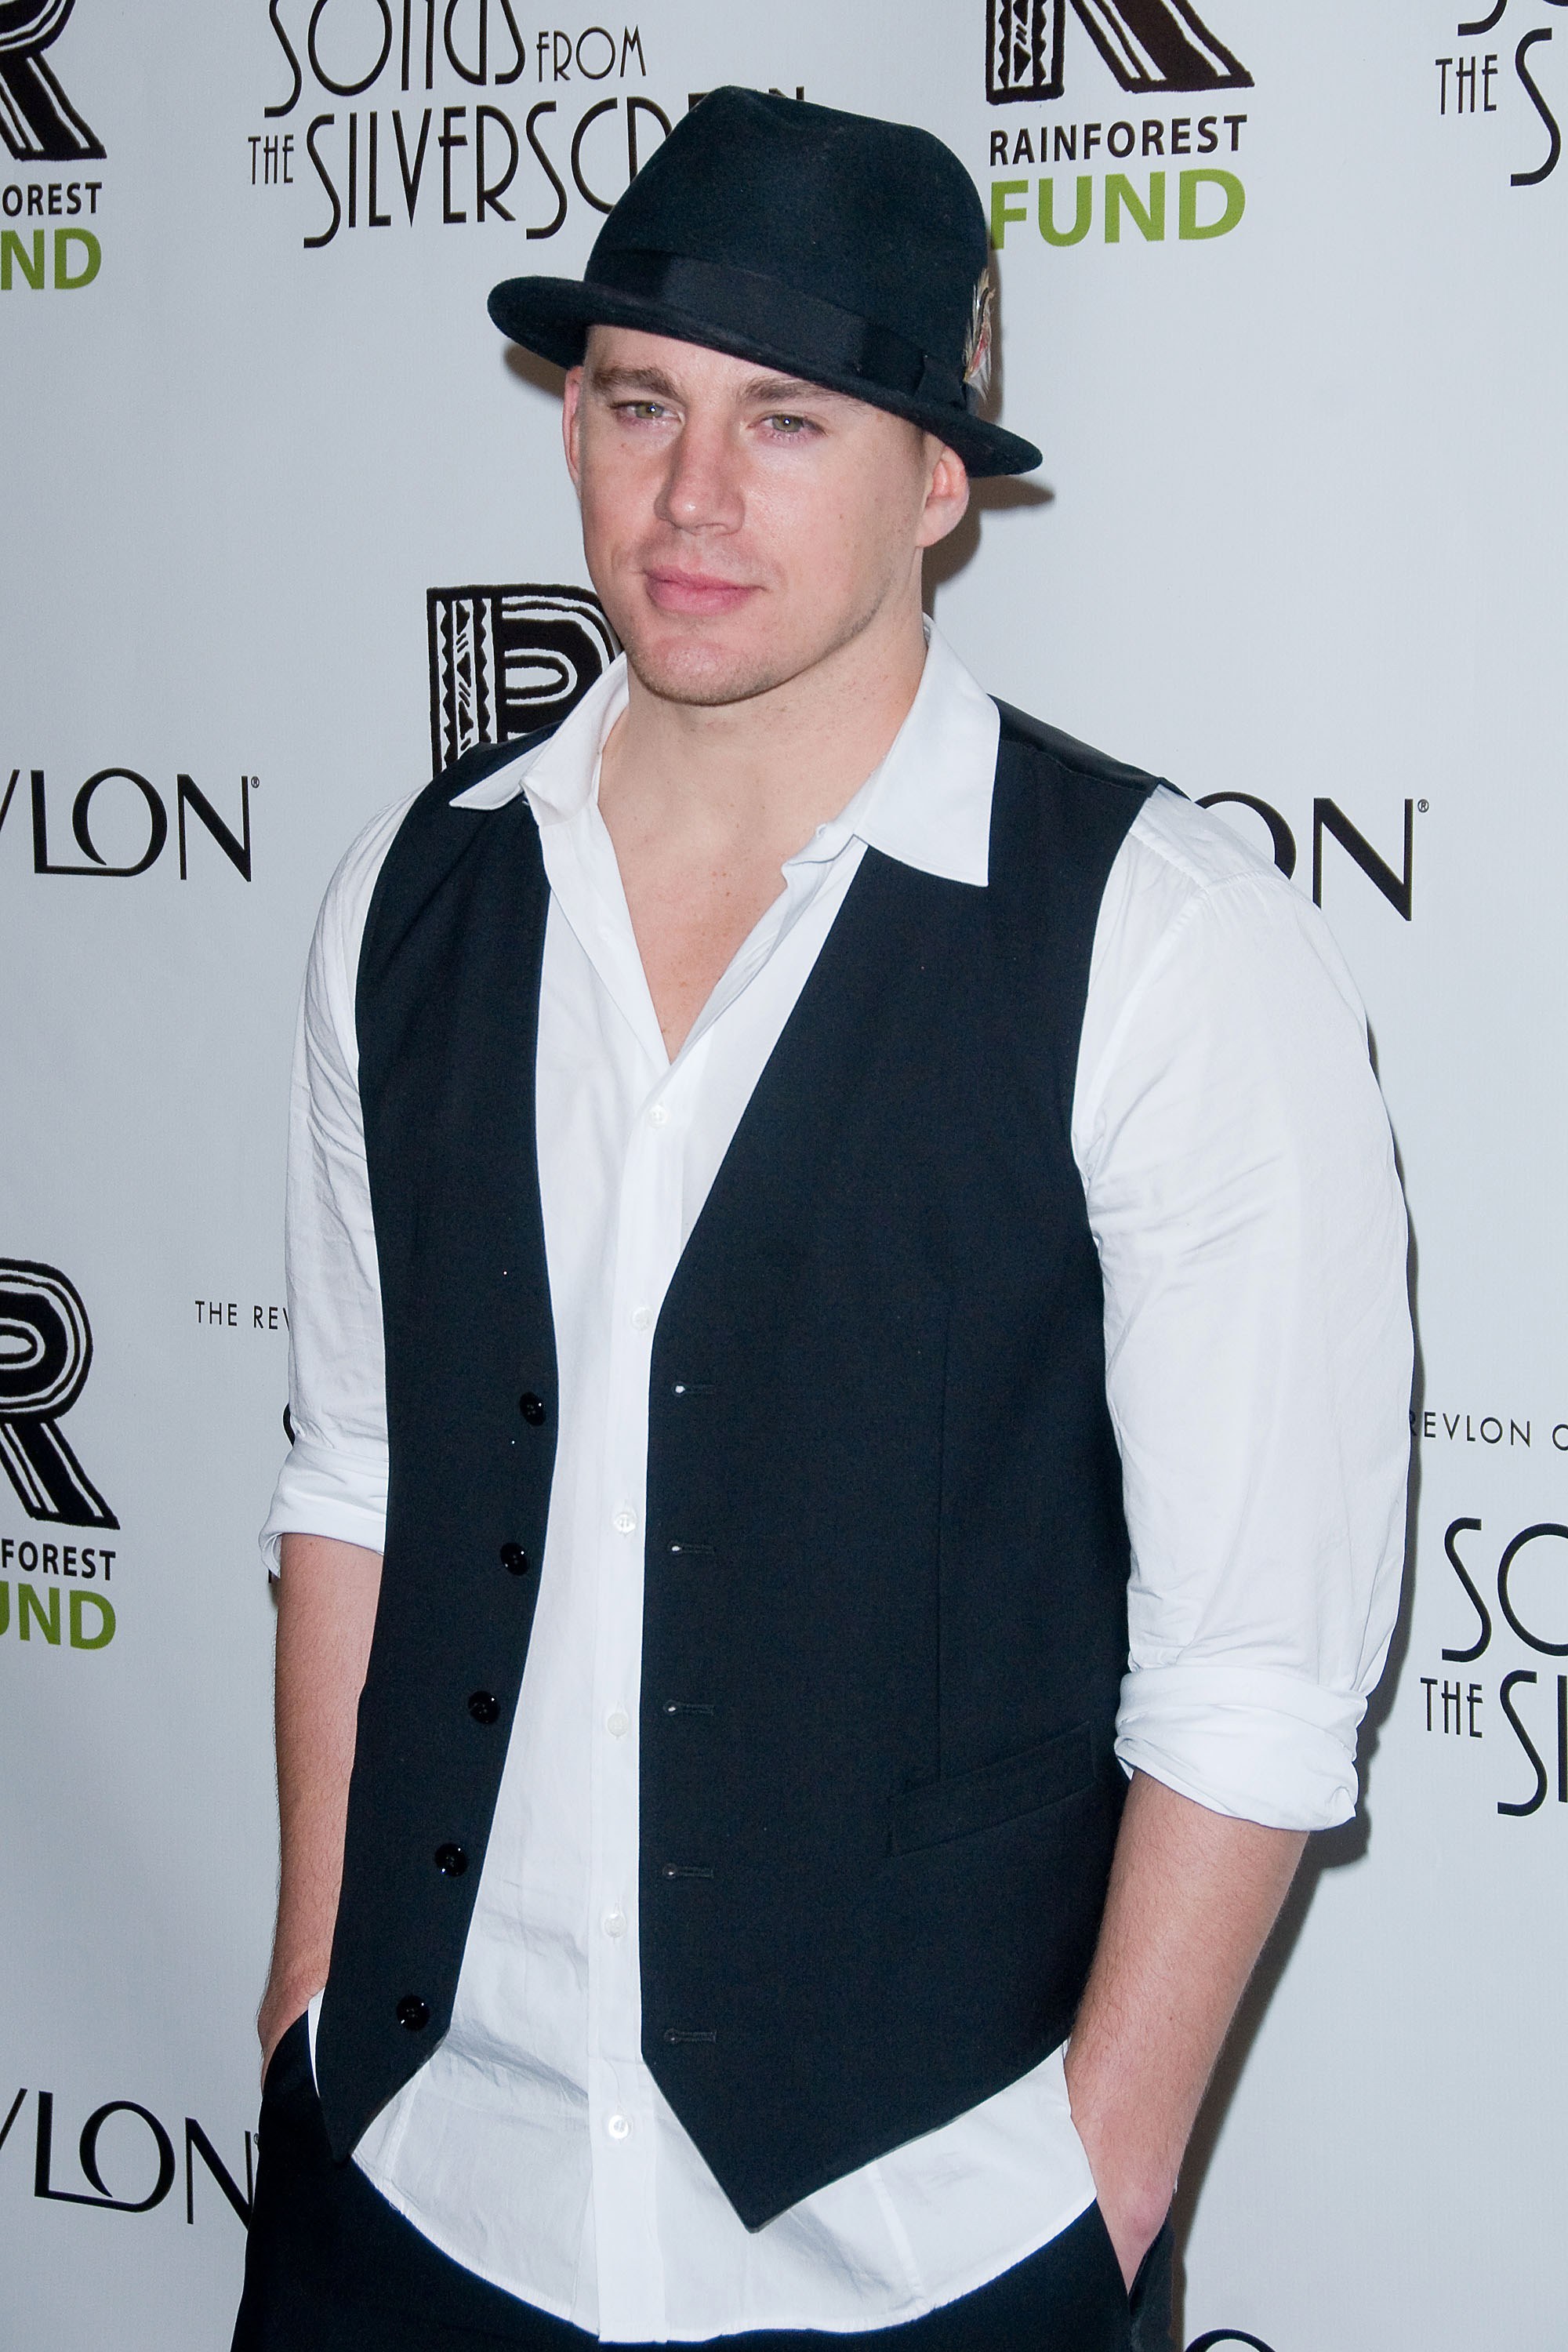 channing tatum step up. In 2005, Tatum met Jenna Dewan on the set of Step Up. They began dating 